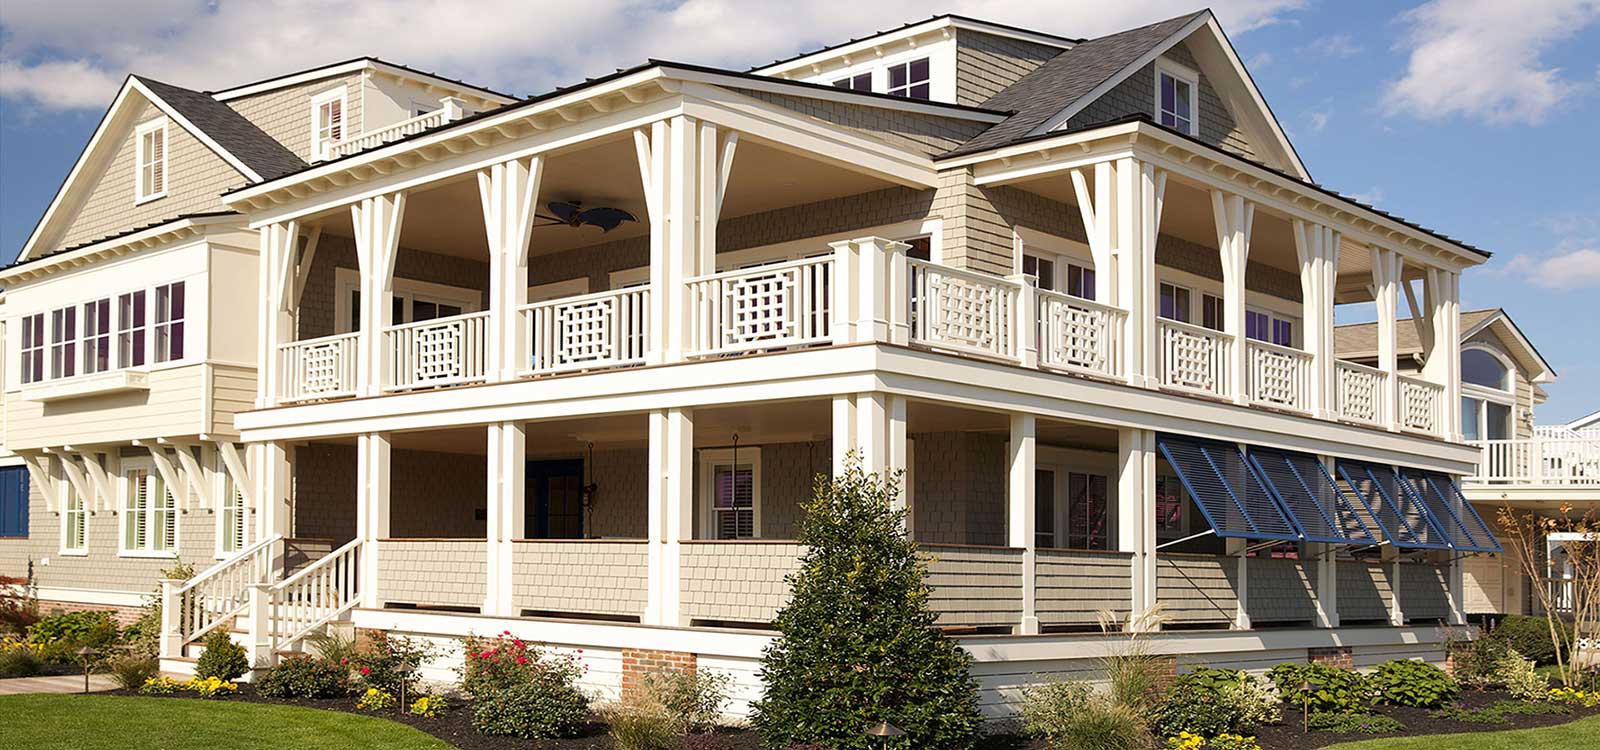 A large white house with a balcony and porch.